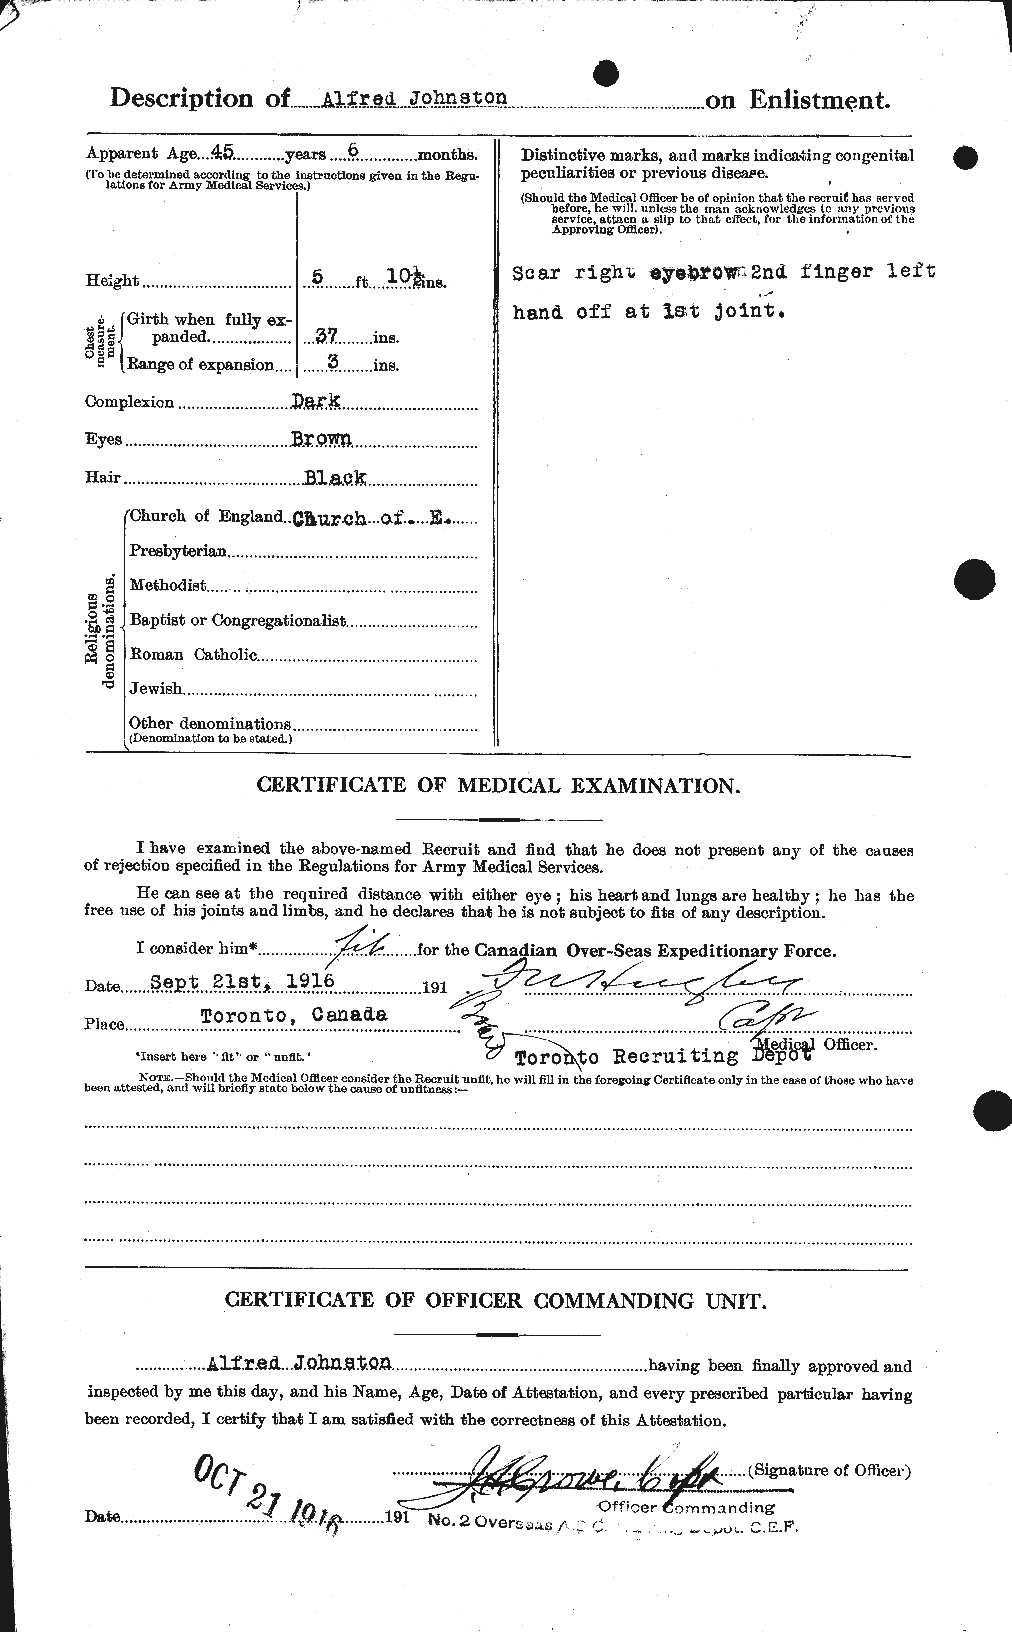 Personnel Records of the First World War - CEF 420984b